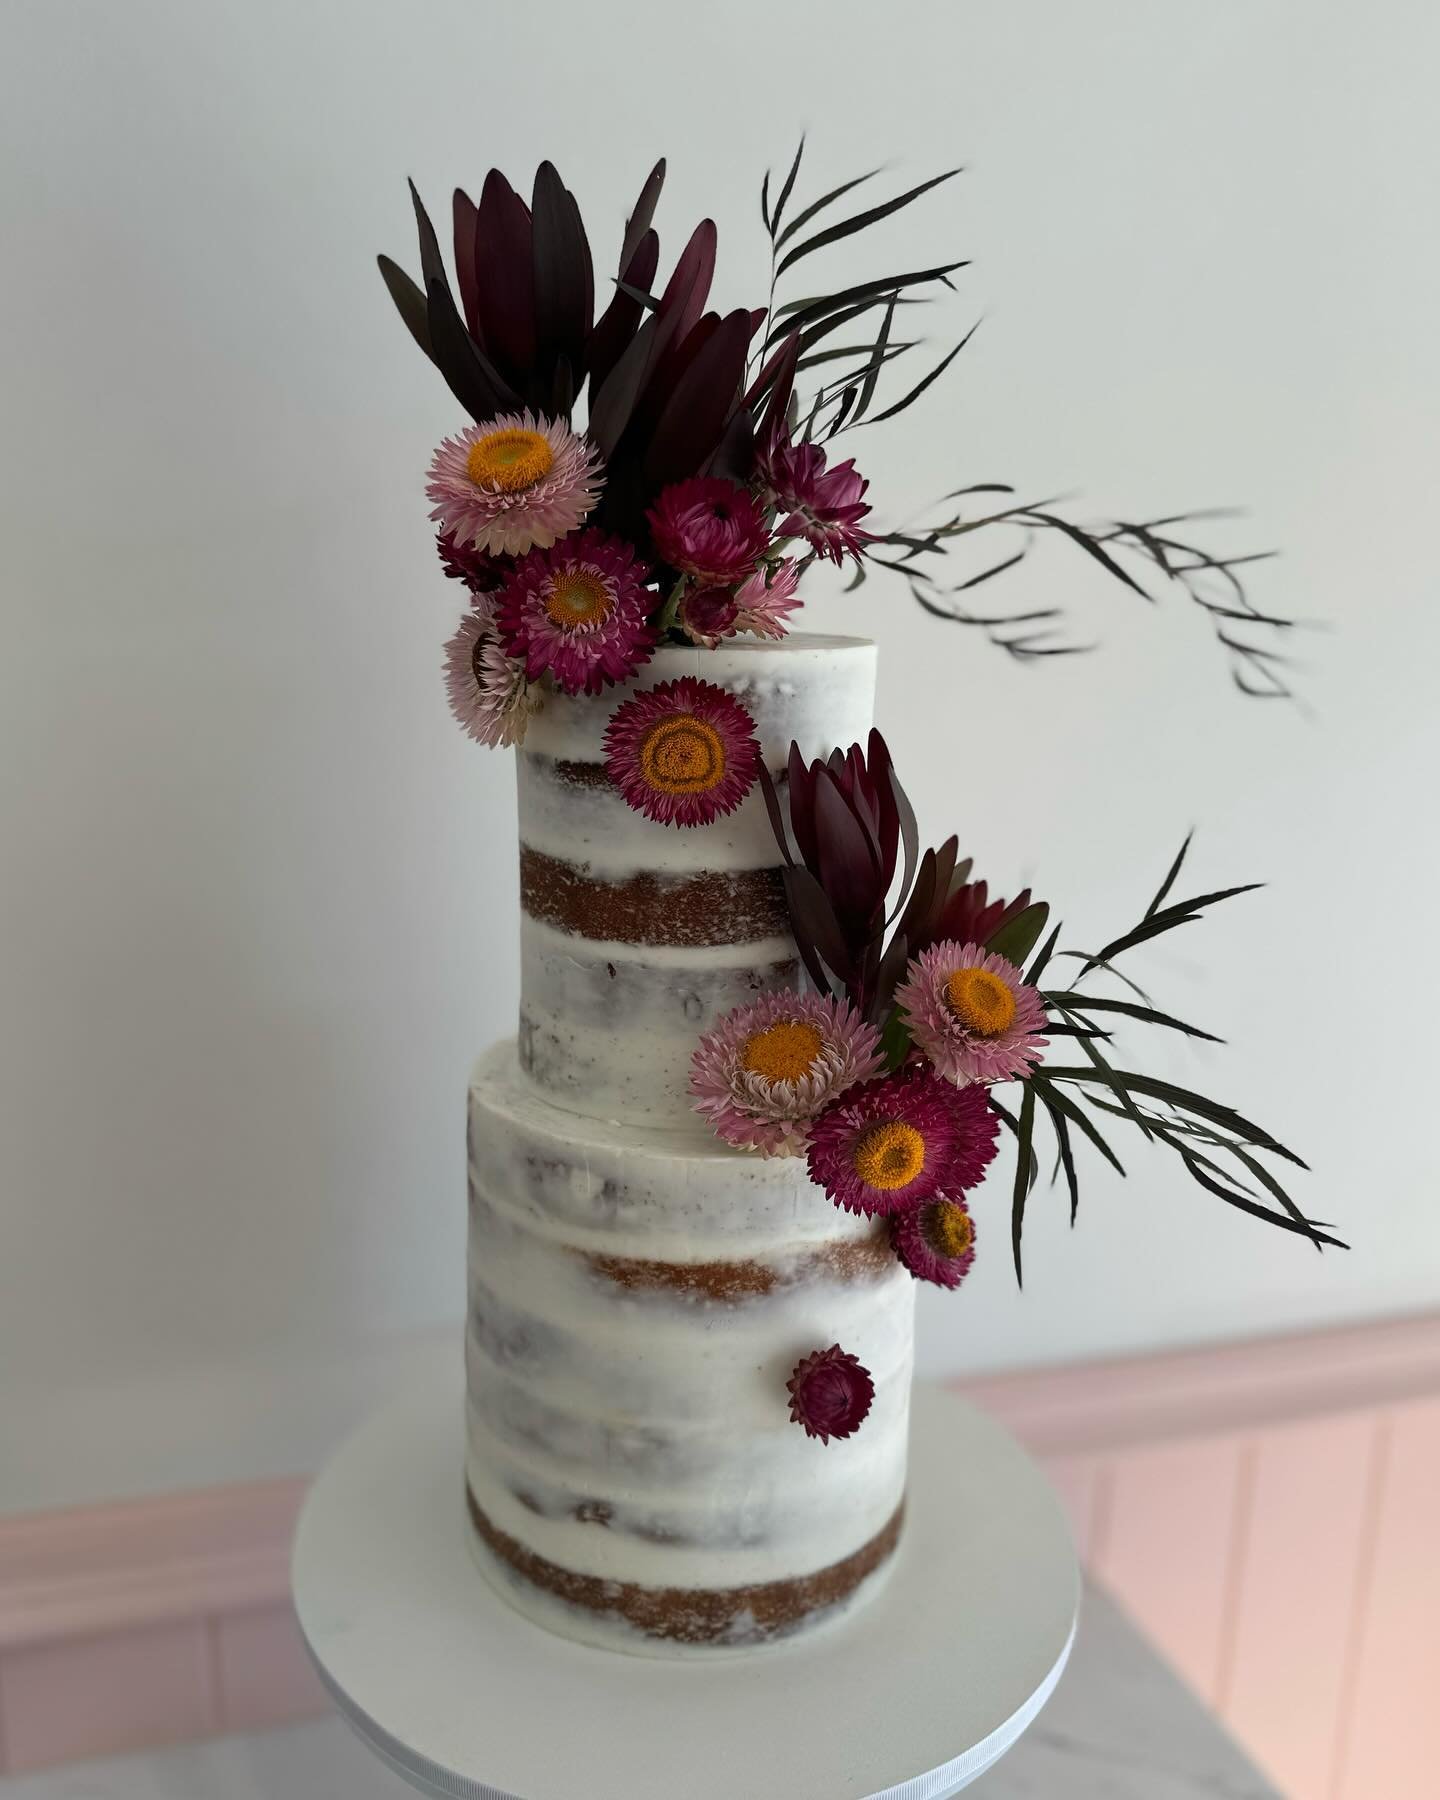 Semi frosted with natives, the sweetest pairing 
.
.
#sydneyweddingcake #sydneywedding #sydneycakes #semifrosted #instacake #cakelover #cakeporm #cakepormsydney